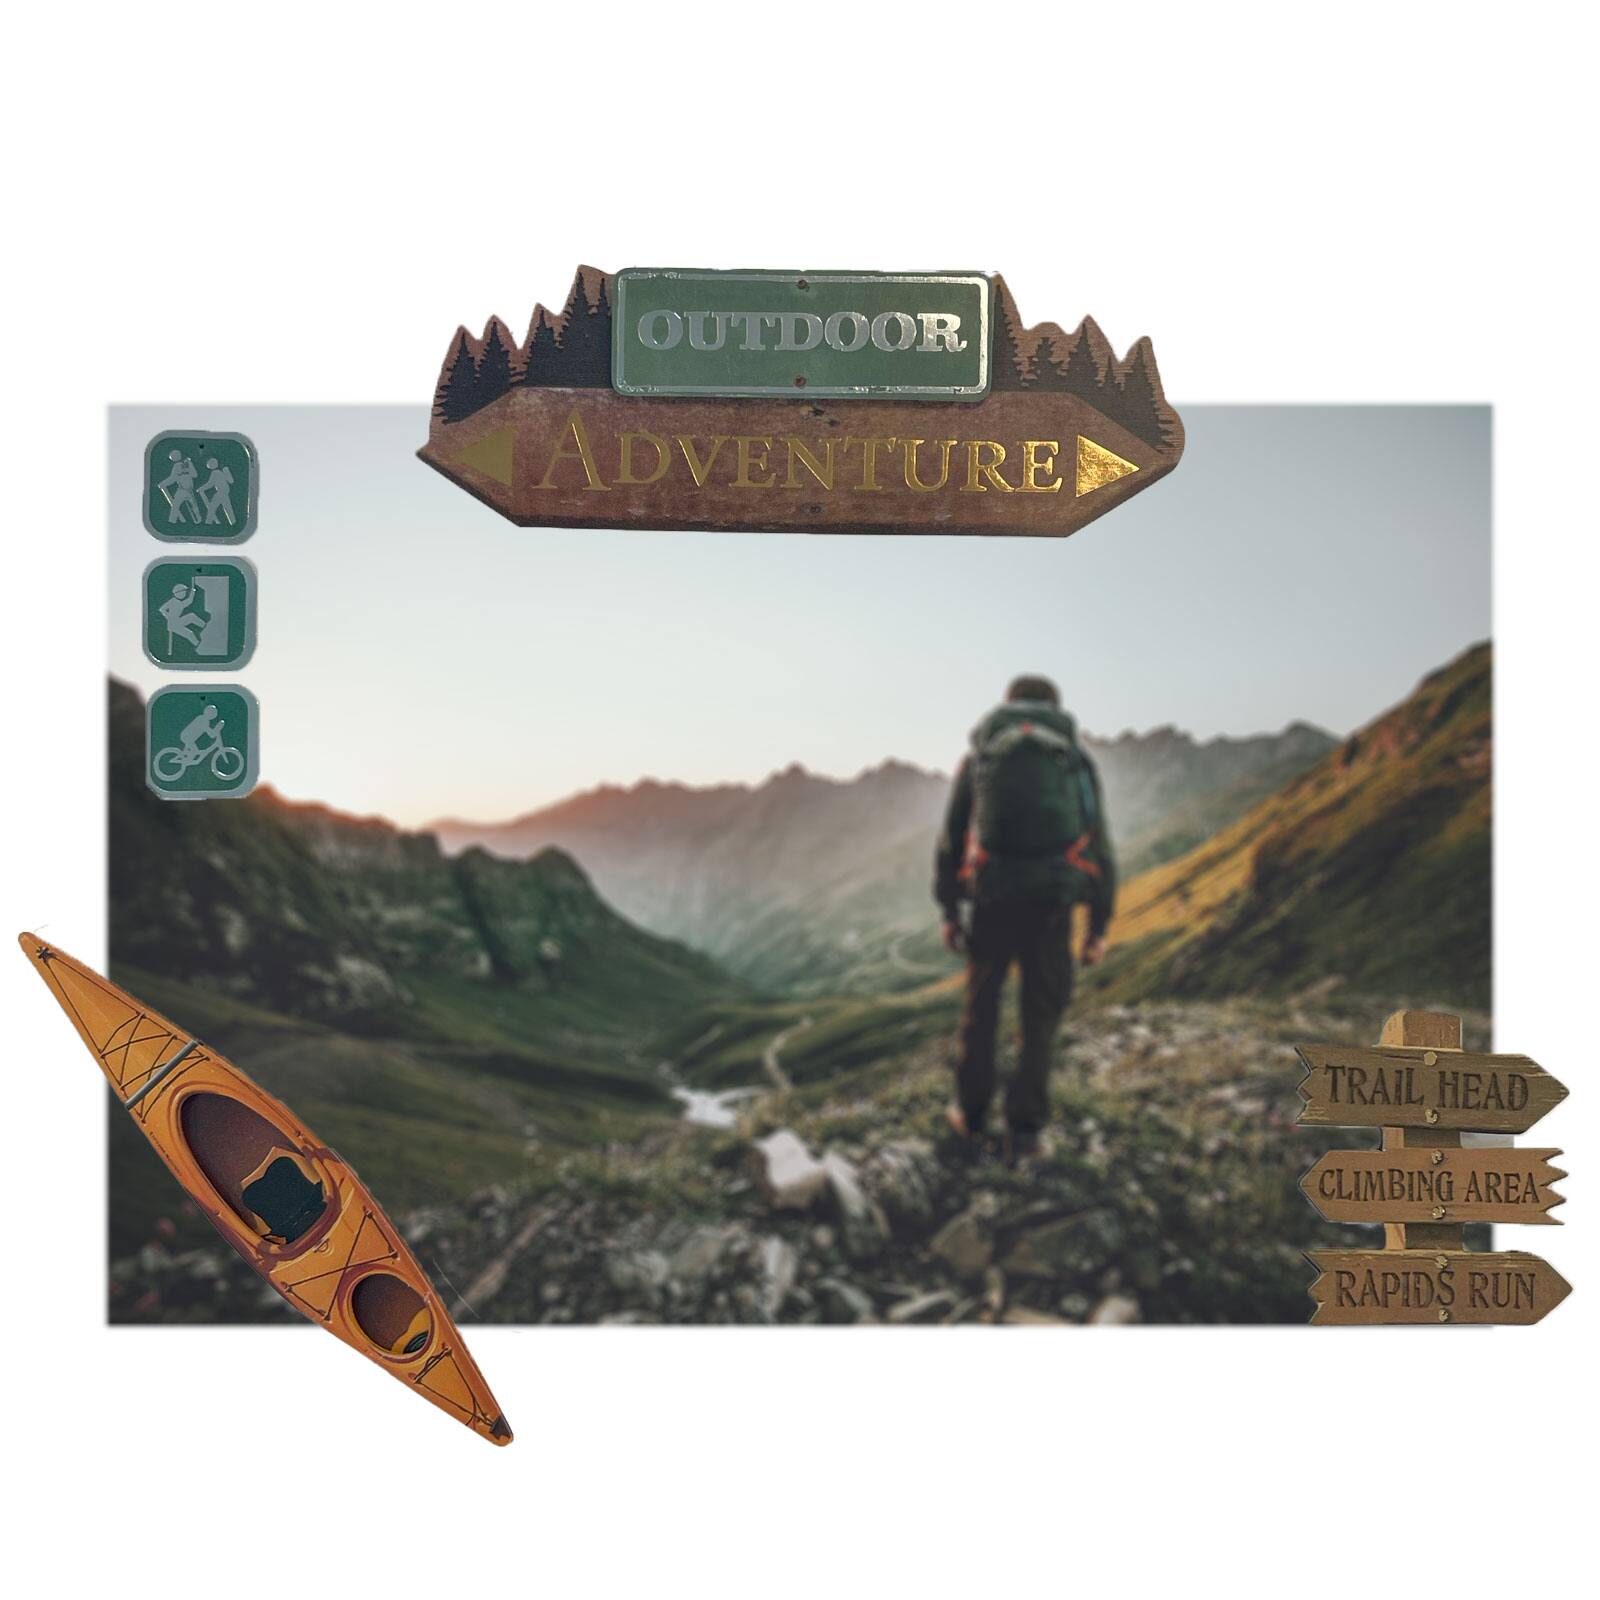 Outdoor Adventure Stickers by Recollection&#x2122;